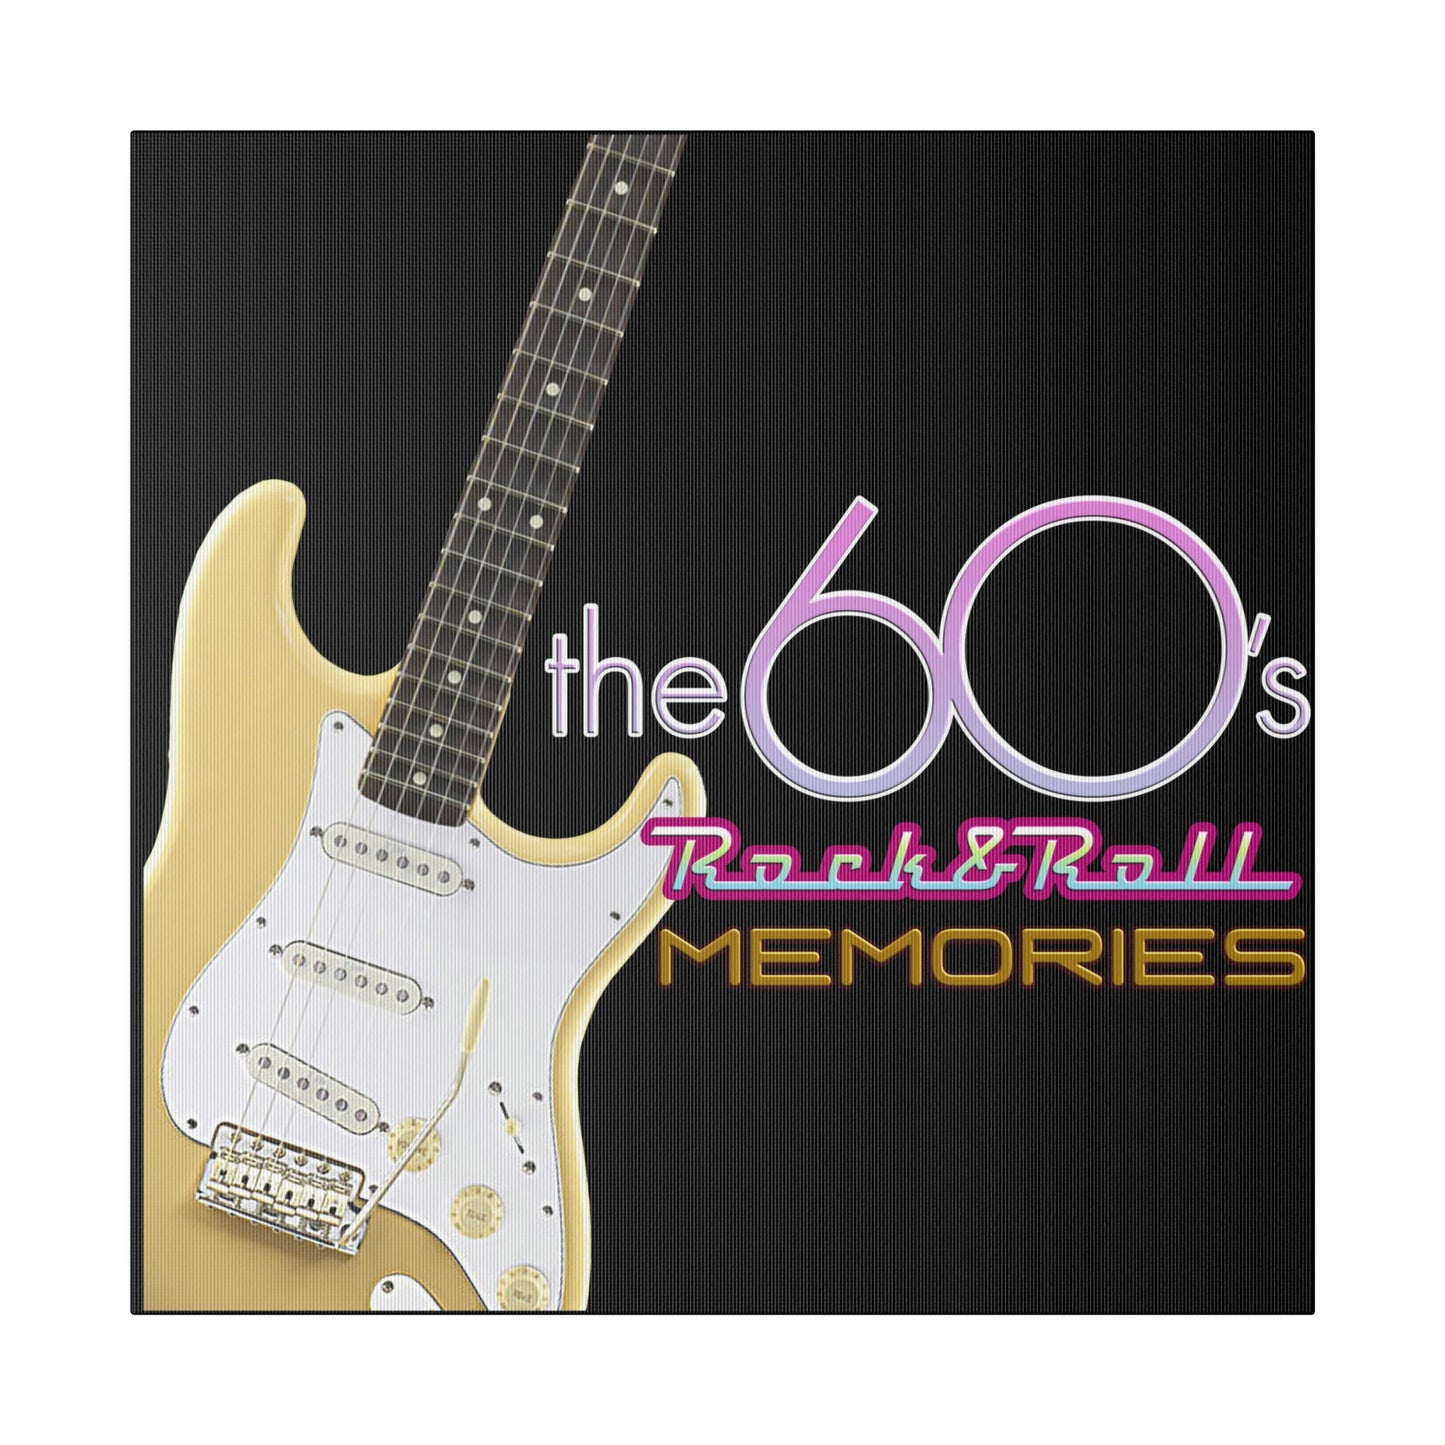 60's Rock and Roll Memories Graphic on Canvas